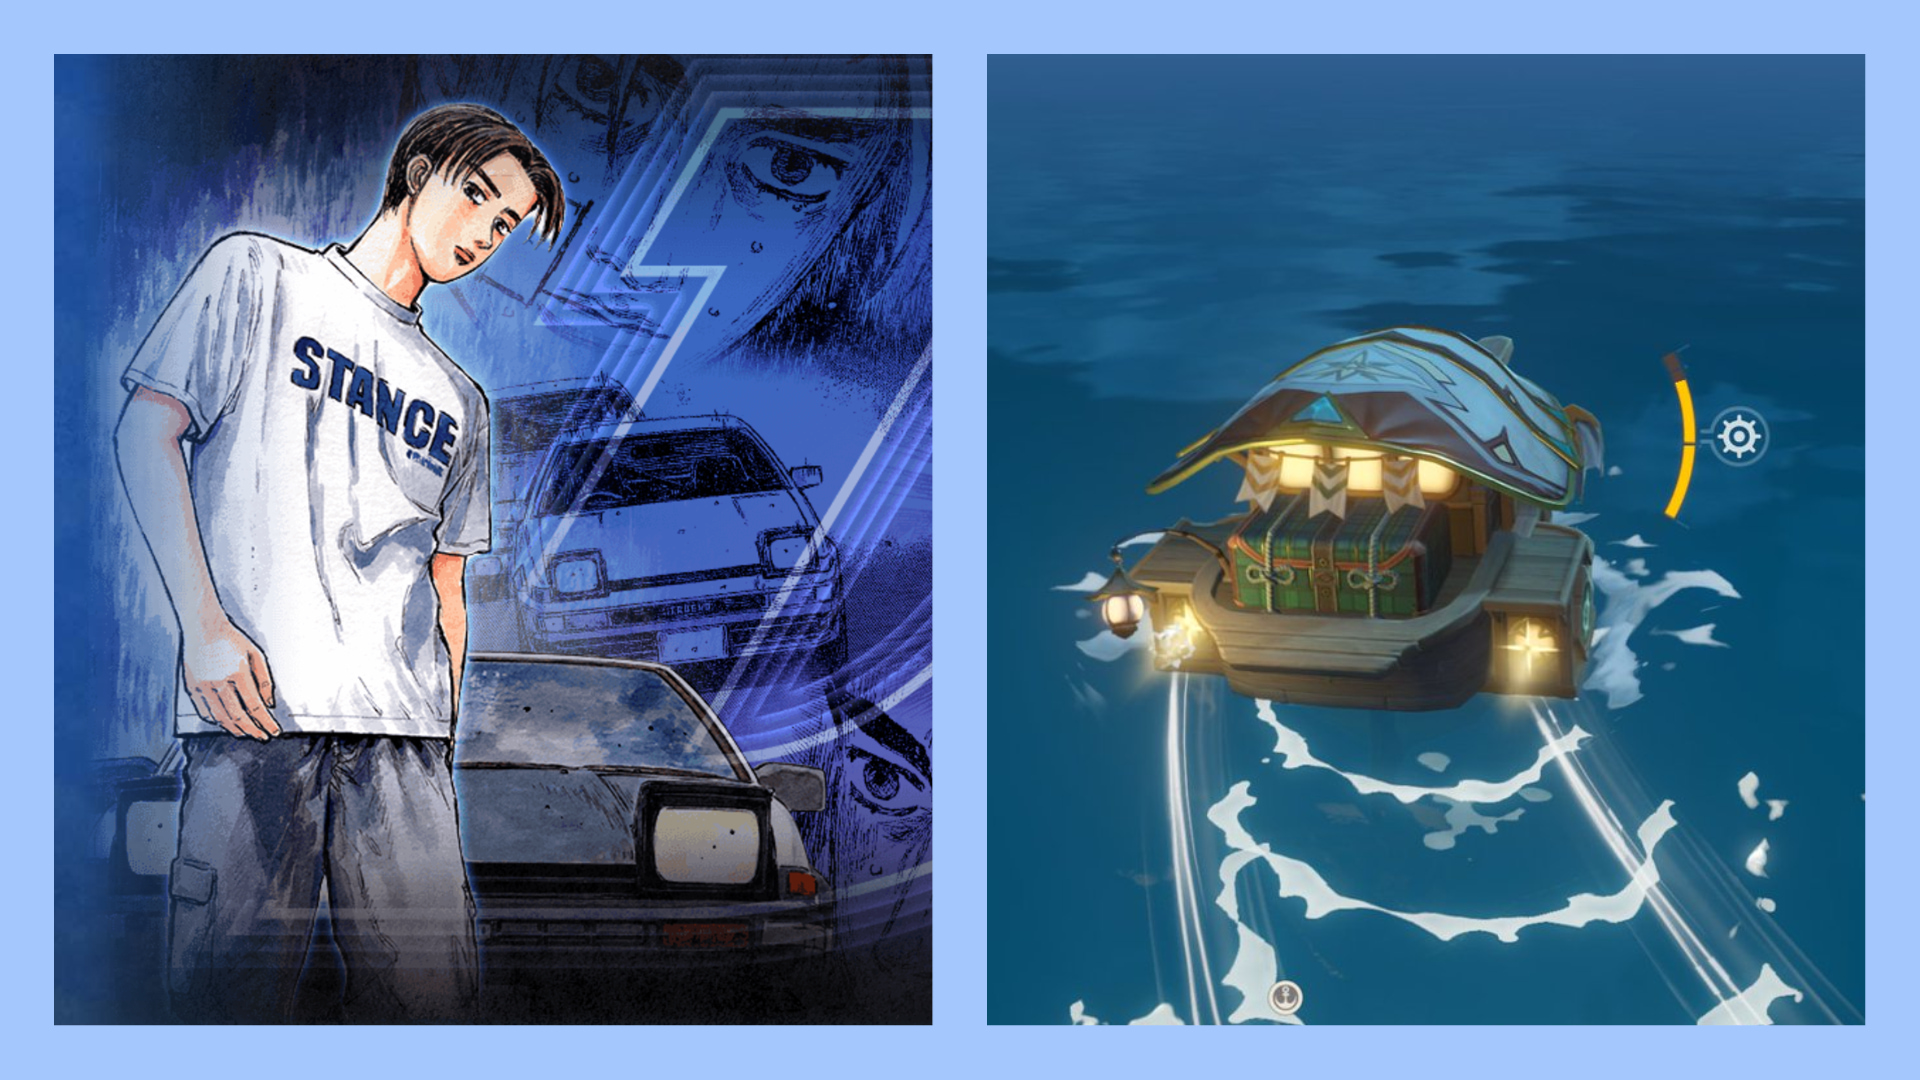 Genshin Impact S Deja Vu Achievement Is Actually An Initial D Anime Reference One Esports One Esports